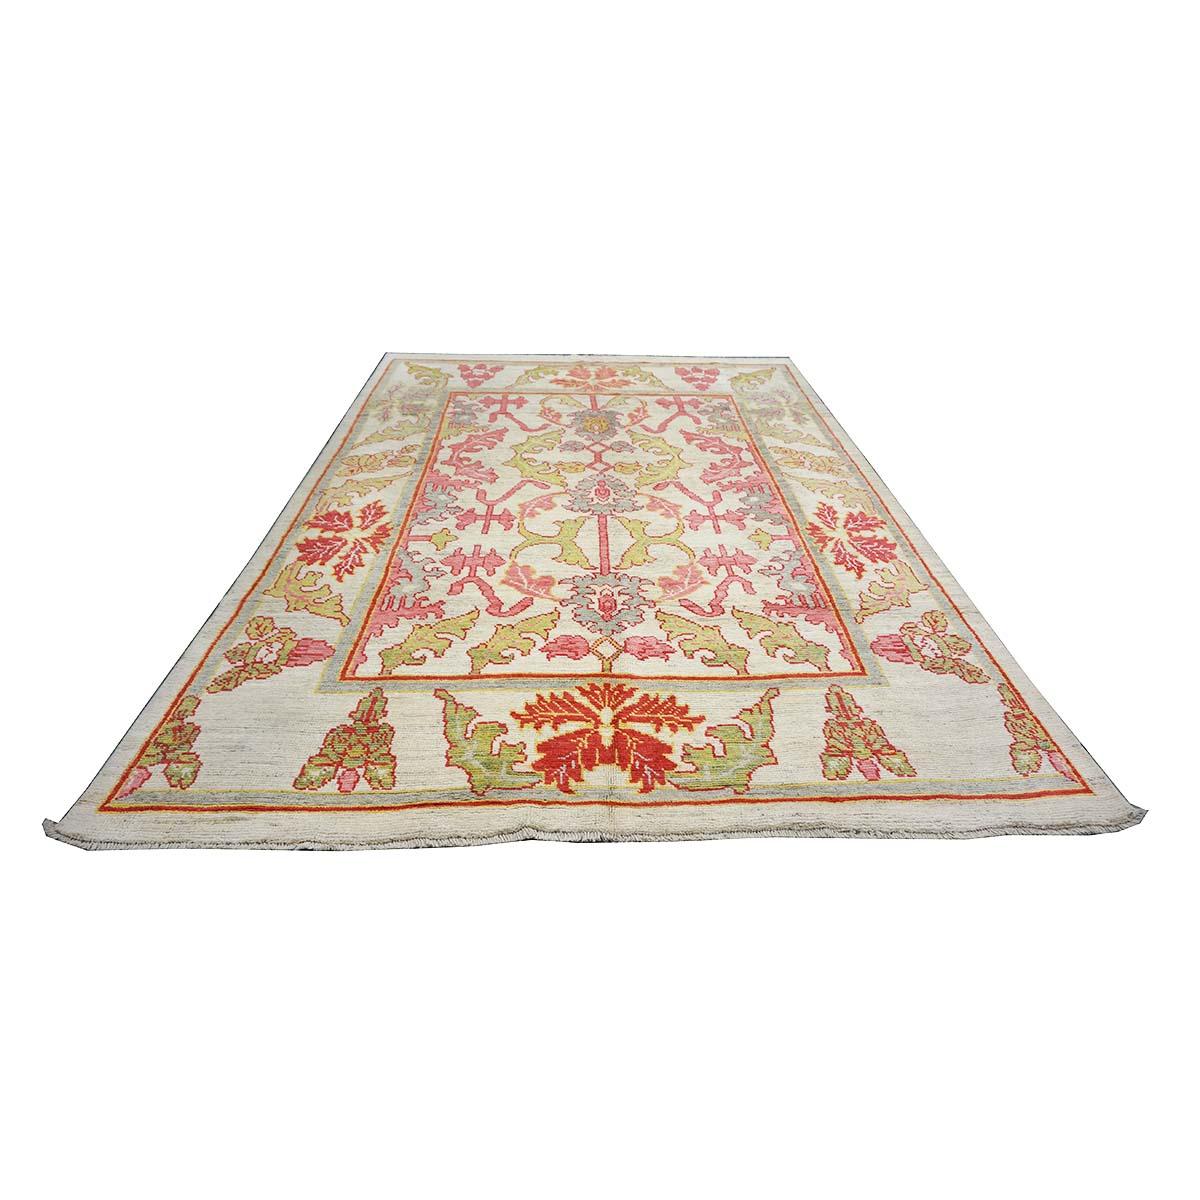 Contemporary 21st Century Persian Oushak Master 8x11 Ivory, Pink, & Yellow Handmade Area Rug For Sale